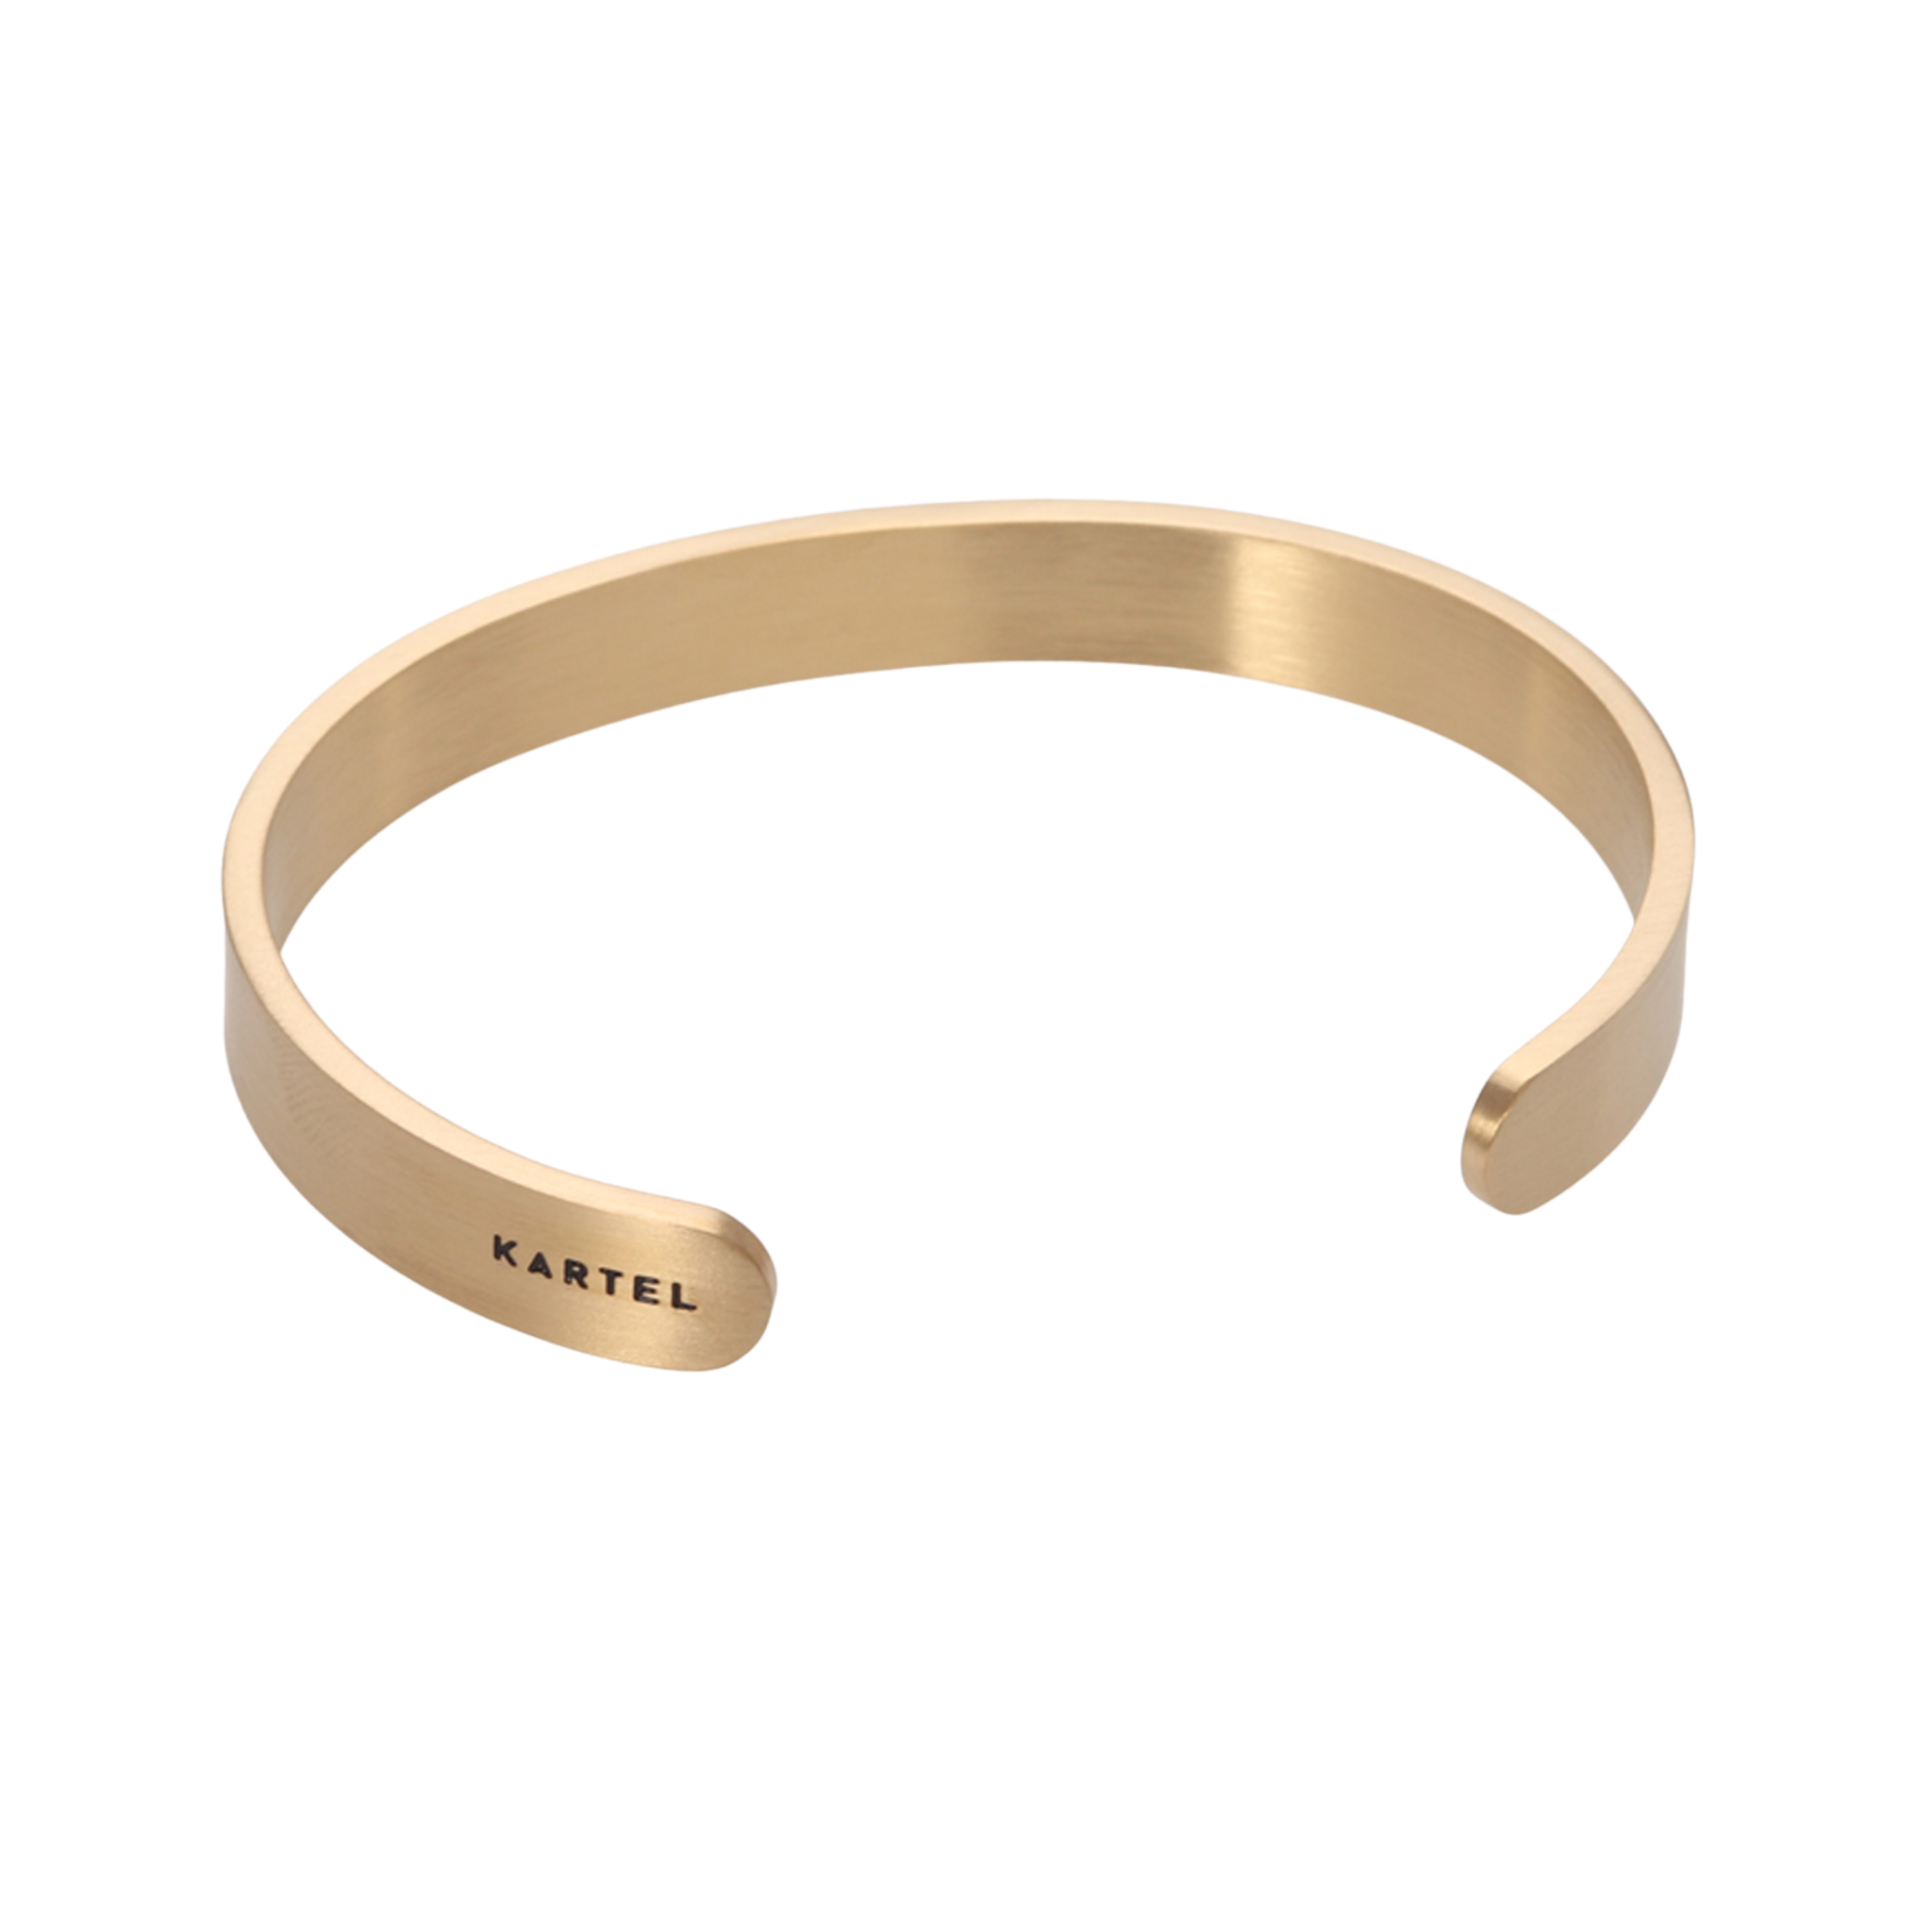 Brushed Gold Steel Cuff - 4 Sizes